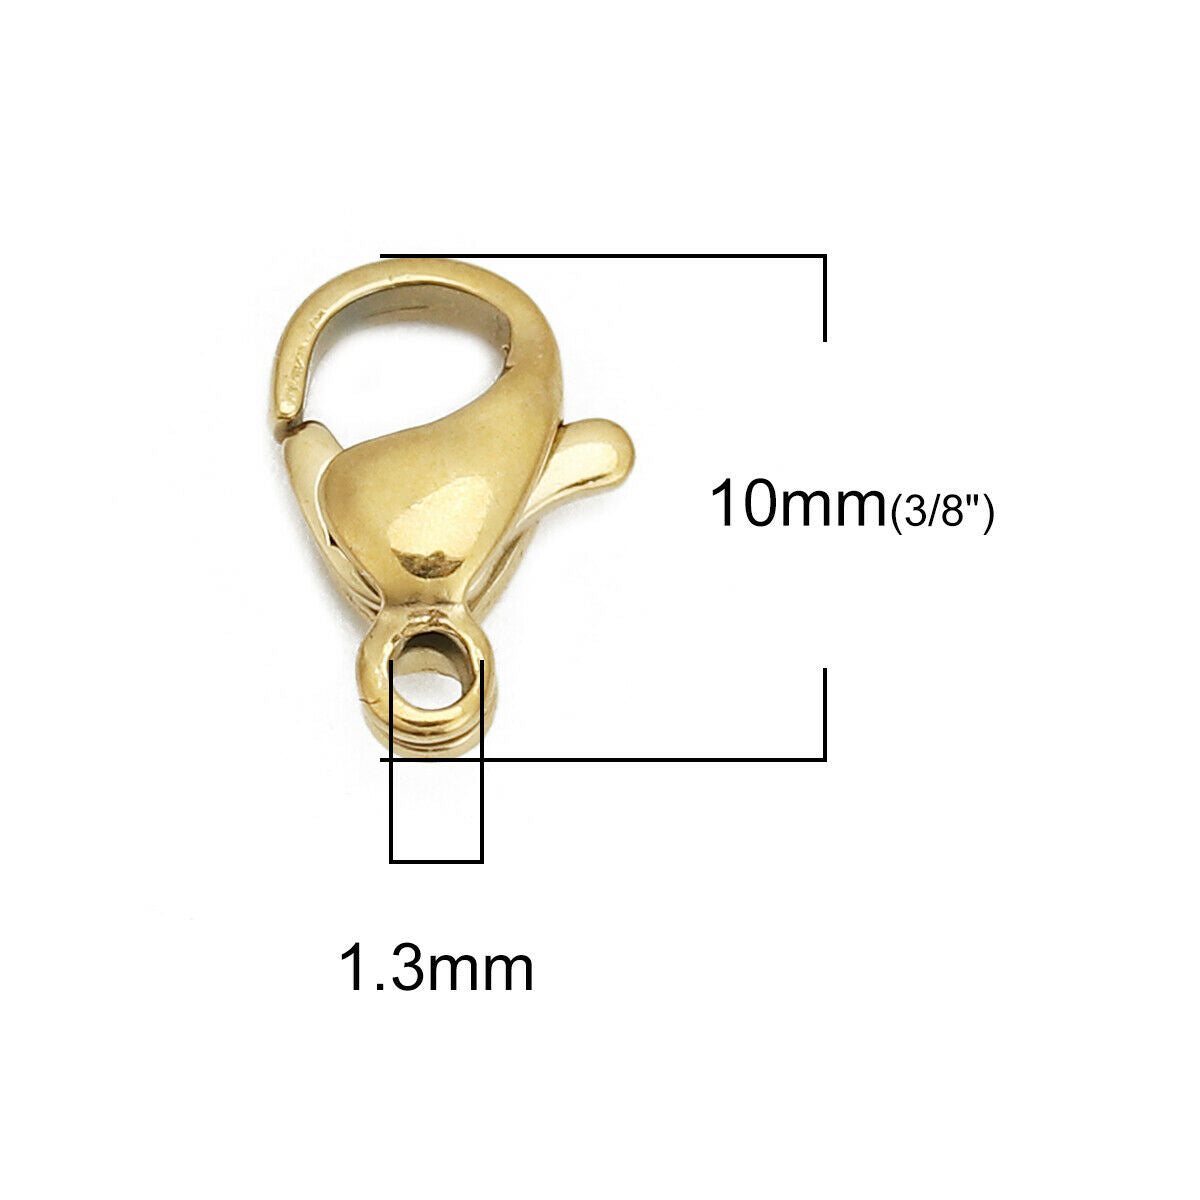 5 Stainless Steel Small Lobster Clasp Findings Gold Plated 10mm x 7mm